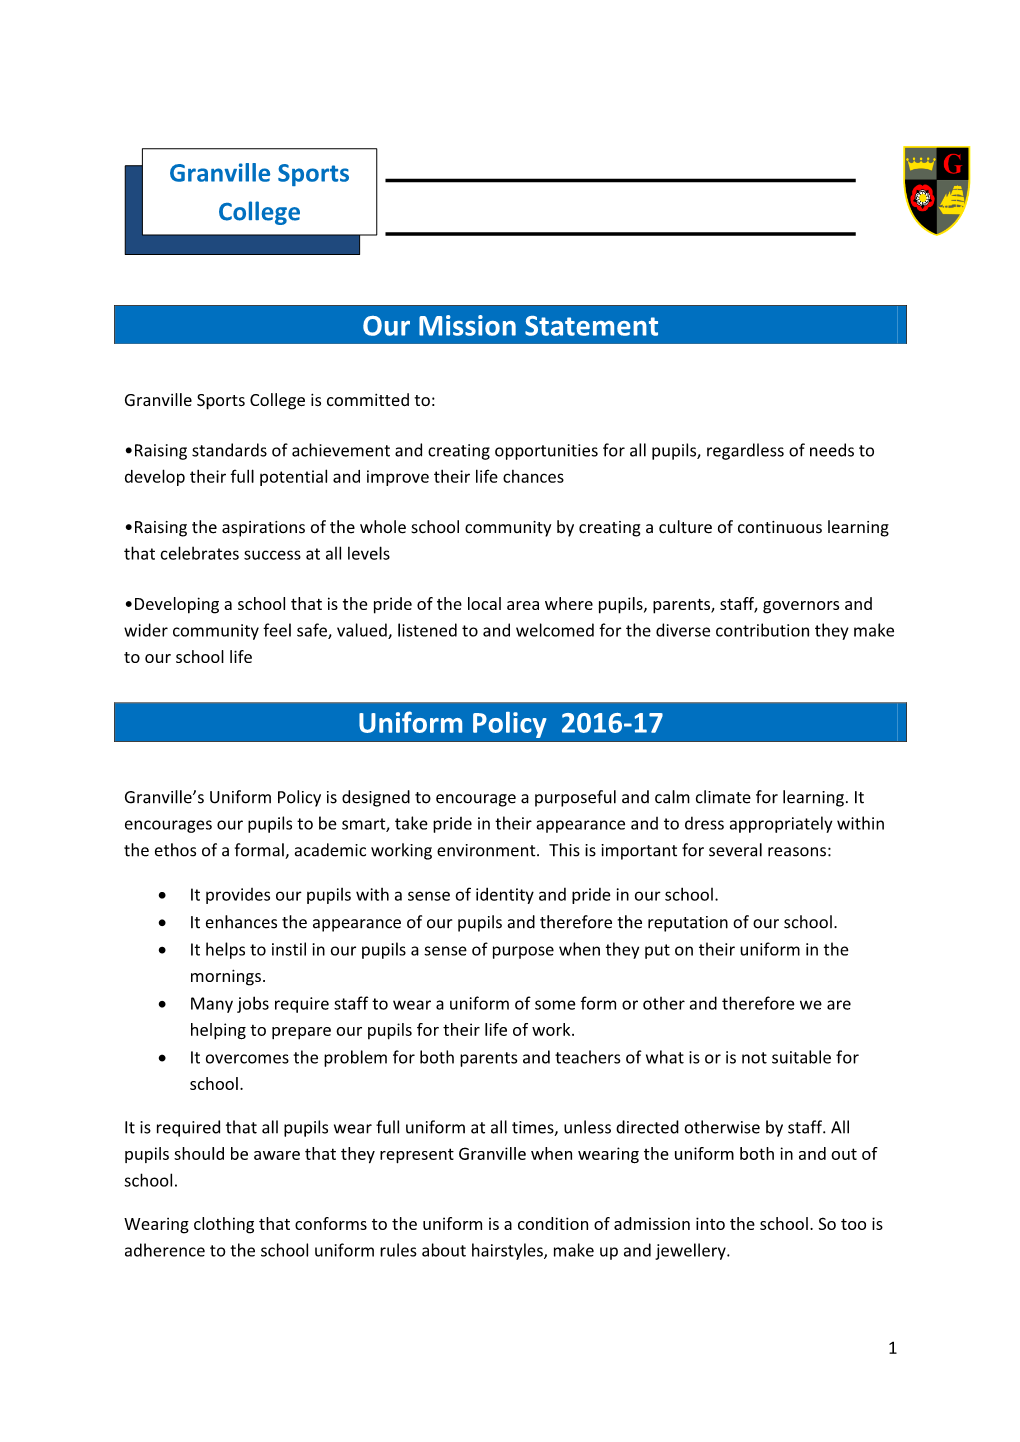 Our Mission Statement Uniform Policy 2016-17